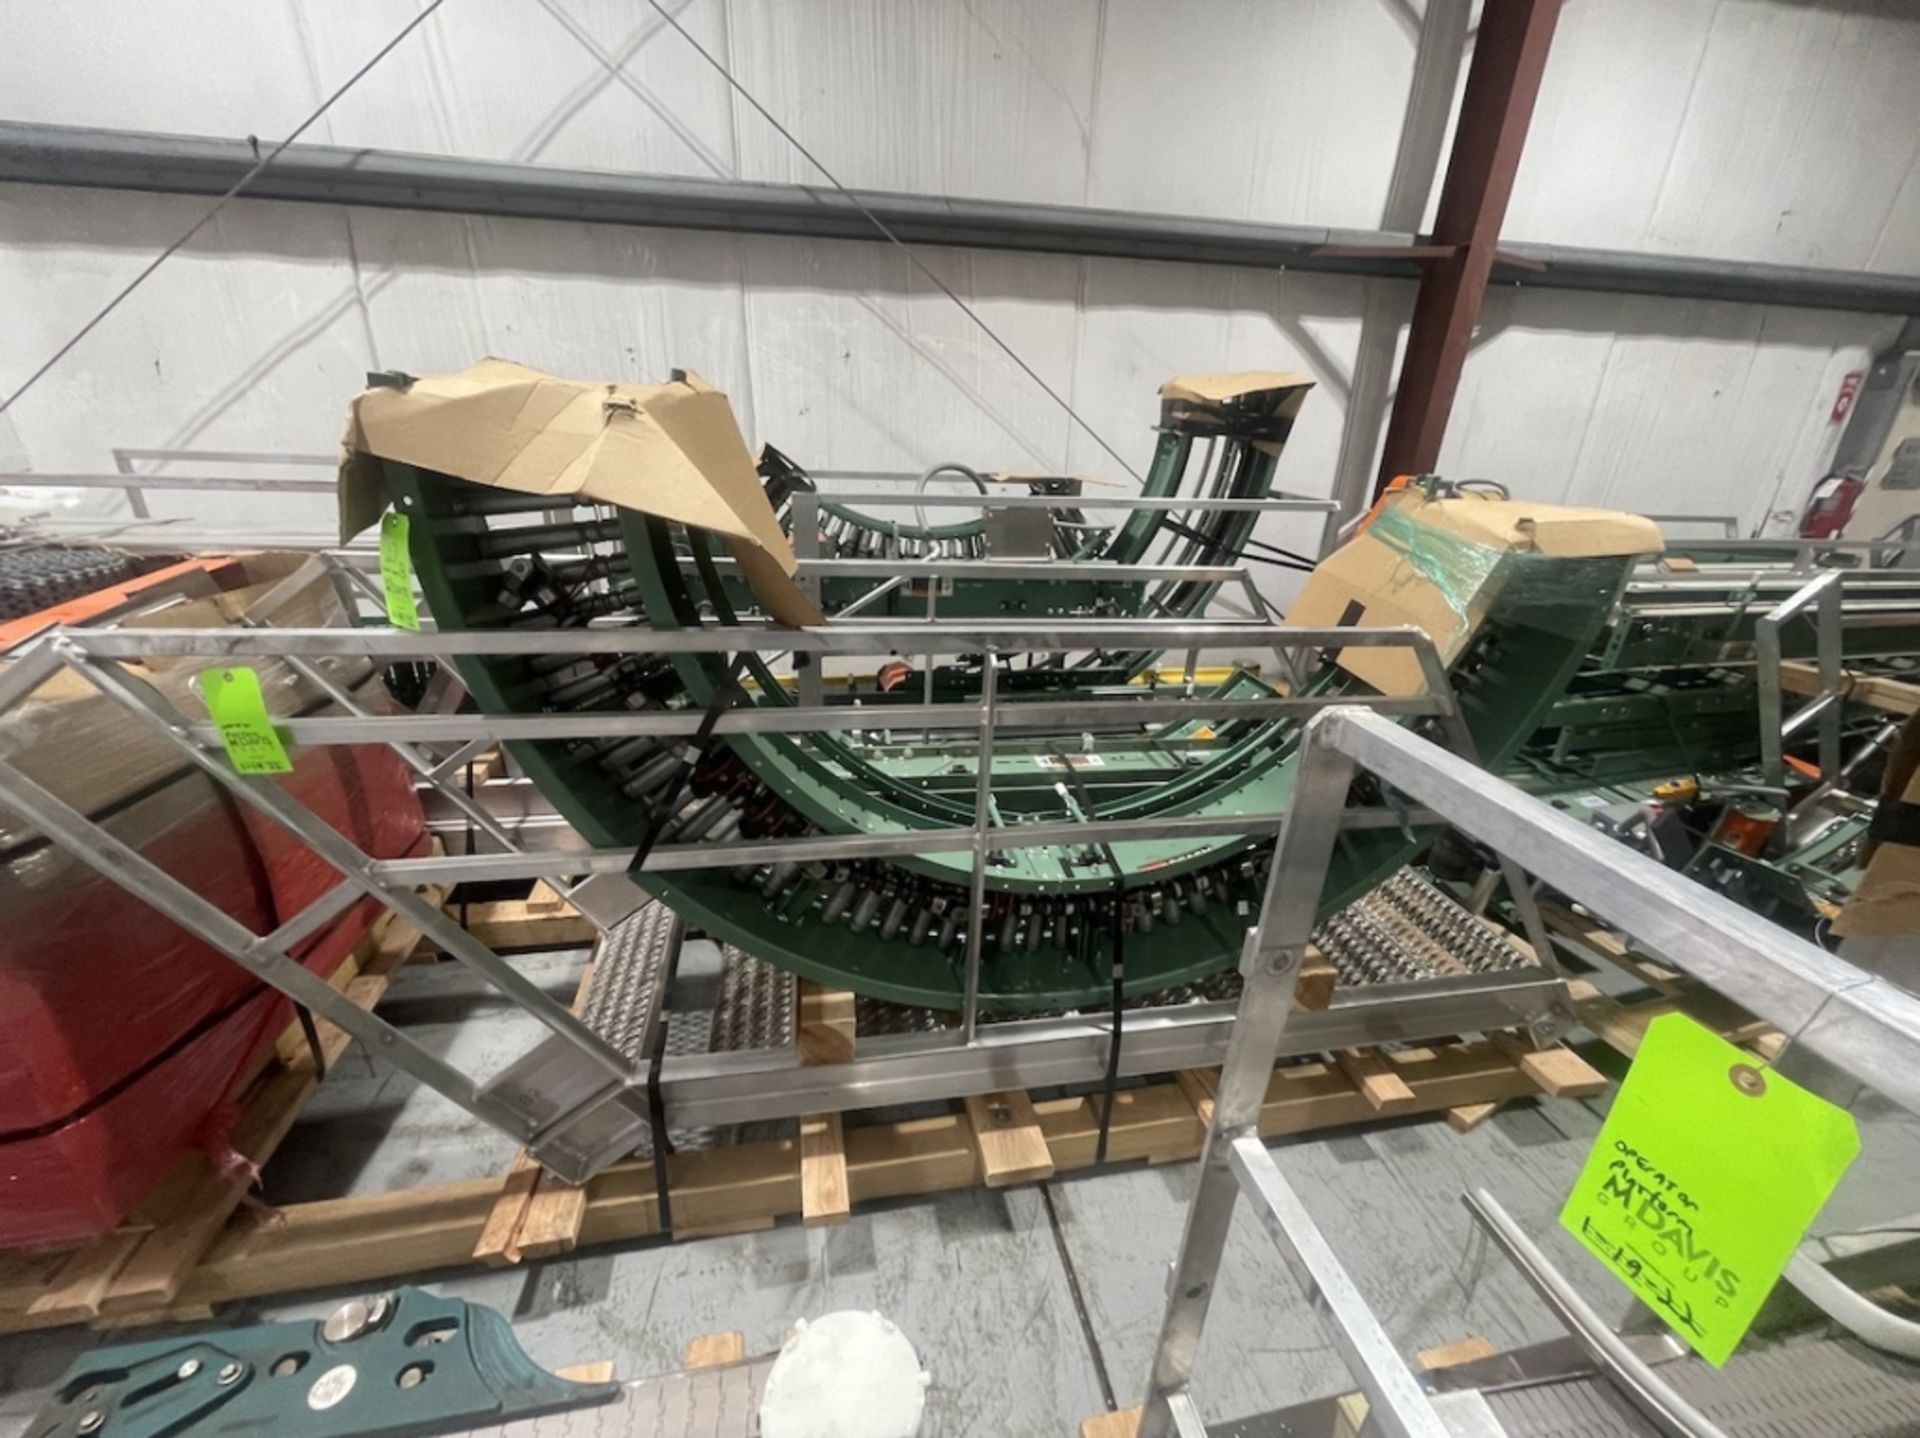 CASE CONVEYOR SYSTEMS ON PRODUCTION LINE (2019 MFG)(INV#83150)(Loading, Handling & Site Management - Image 6 of 11